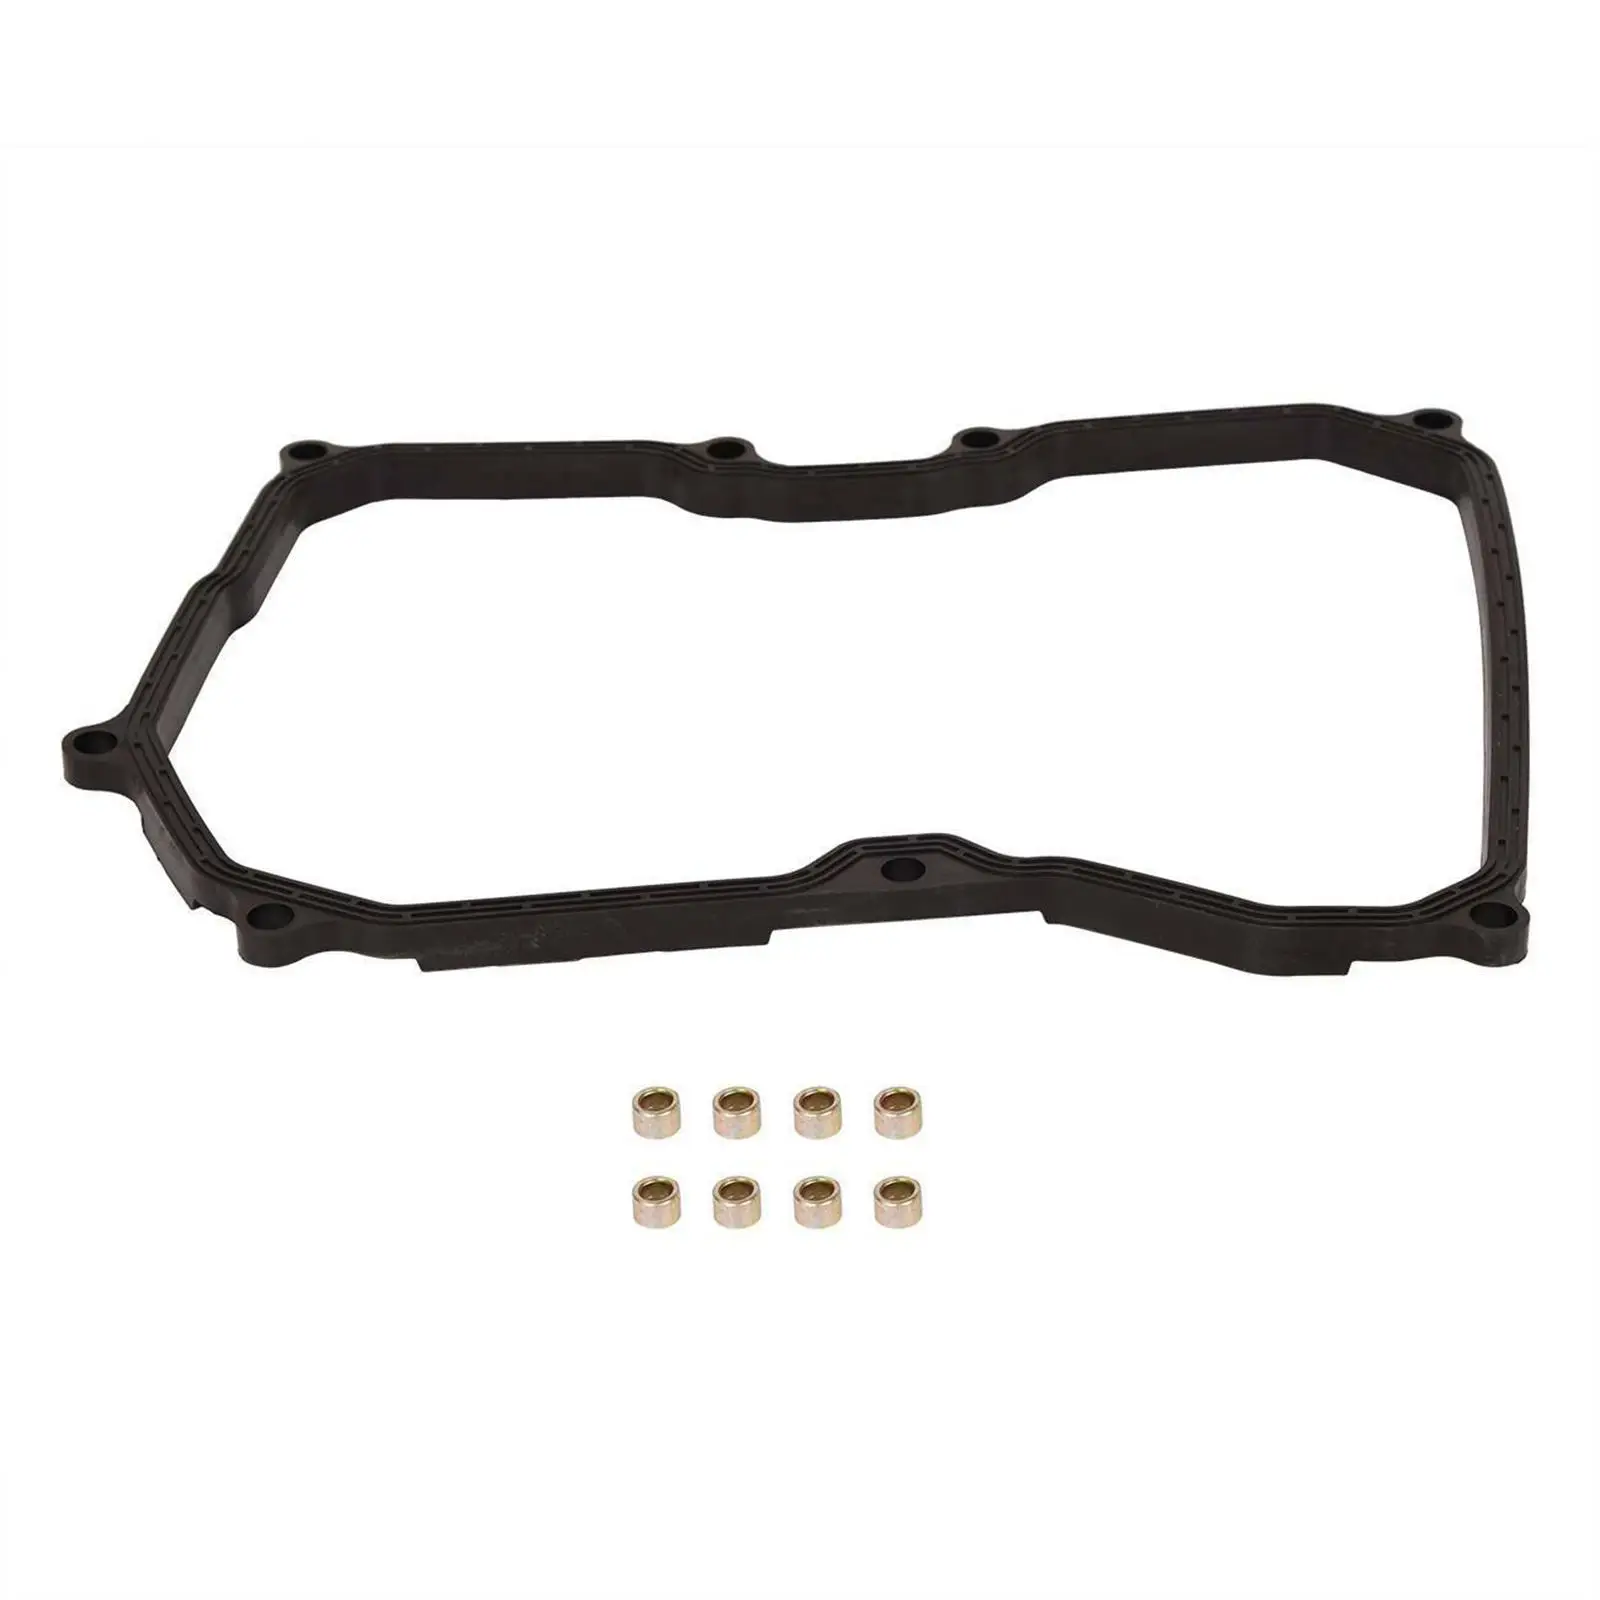 Transmission Oil Pan Gasket Fits for Mini 2007+ Replacement Easy to Install